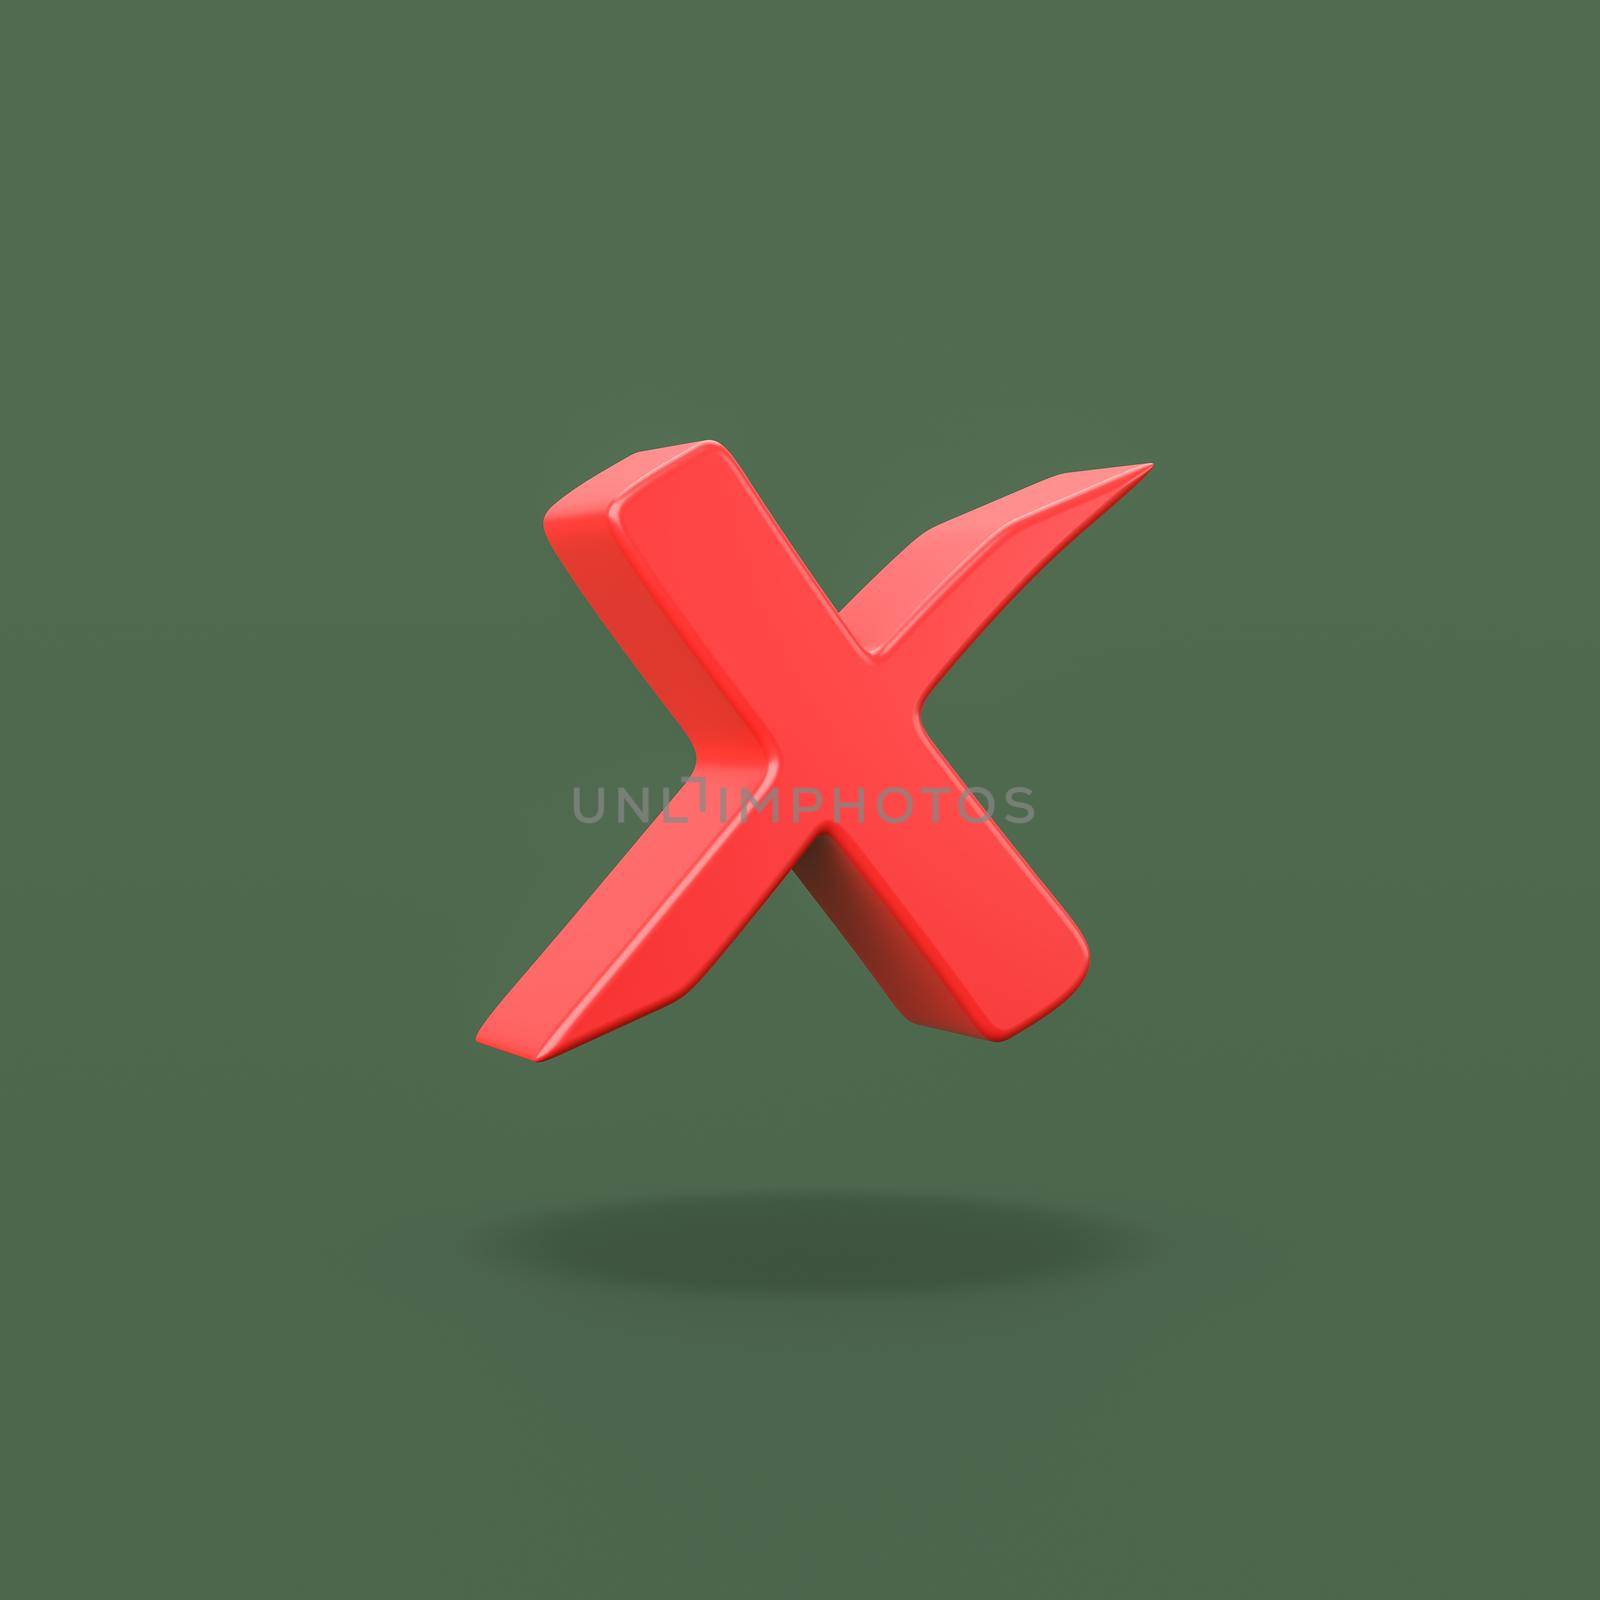 Red Deny Mark on Flat Green Background with Shadow 3D Illustration